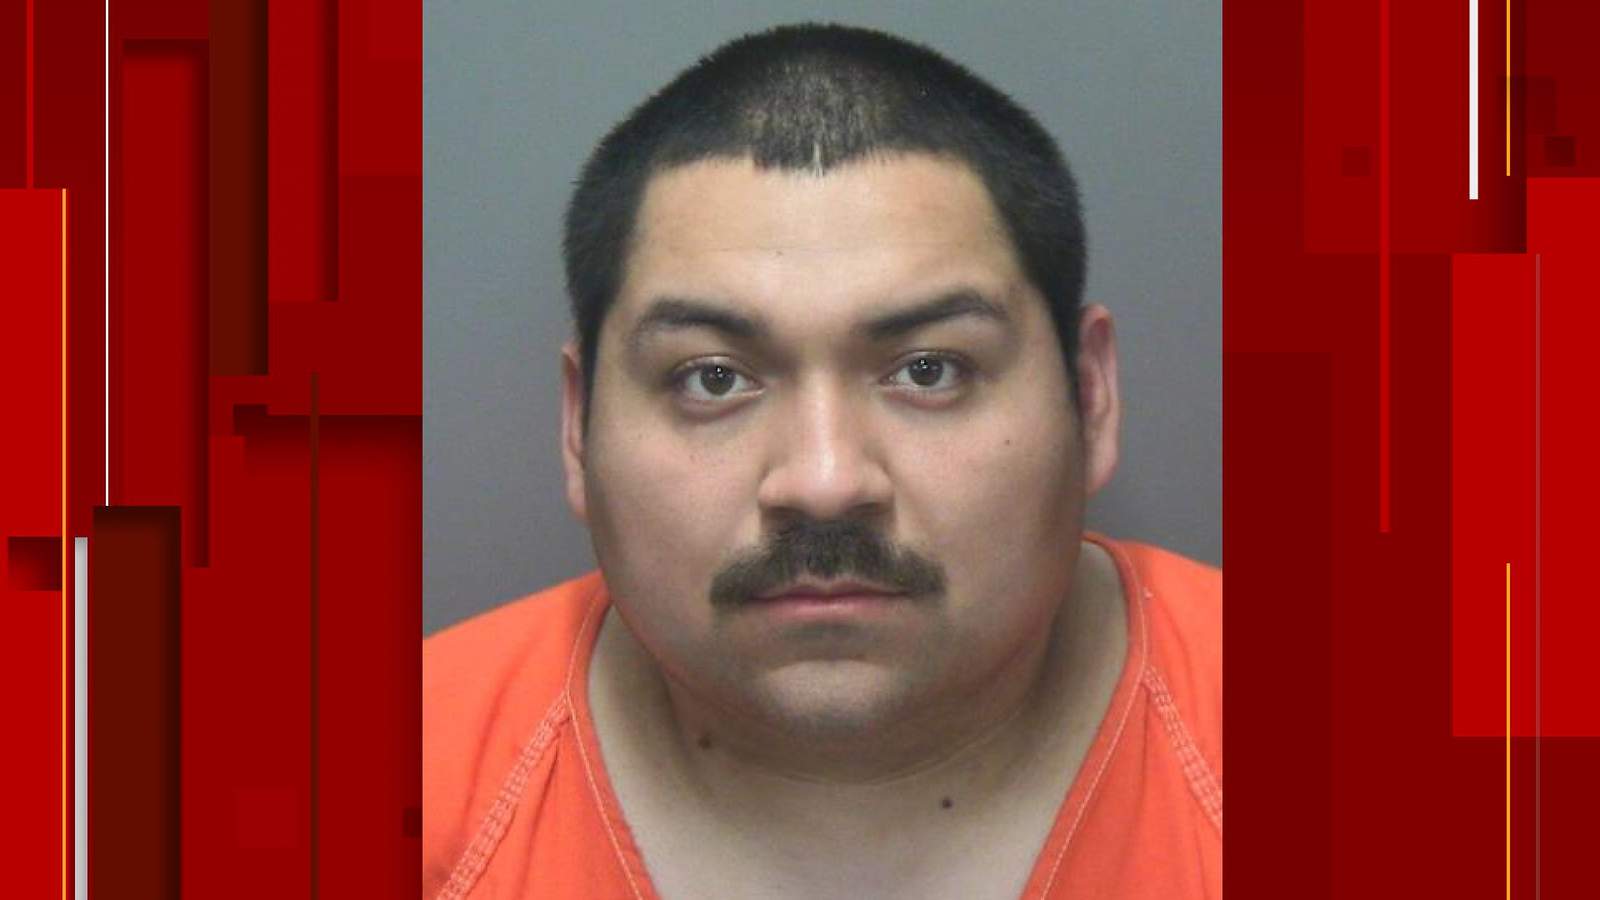 Cop-in-training faces child pornography charges after being arrested at San Antonio law enforcement academy